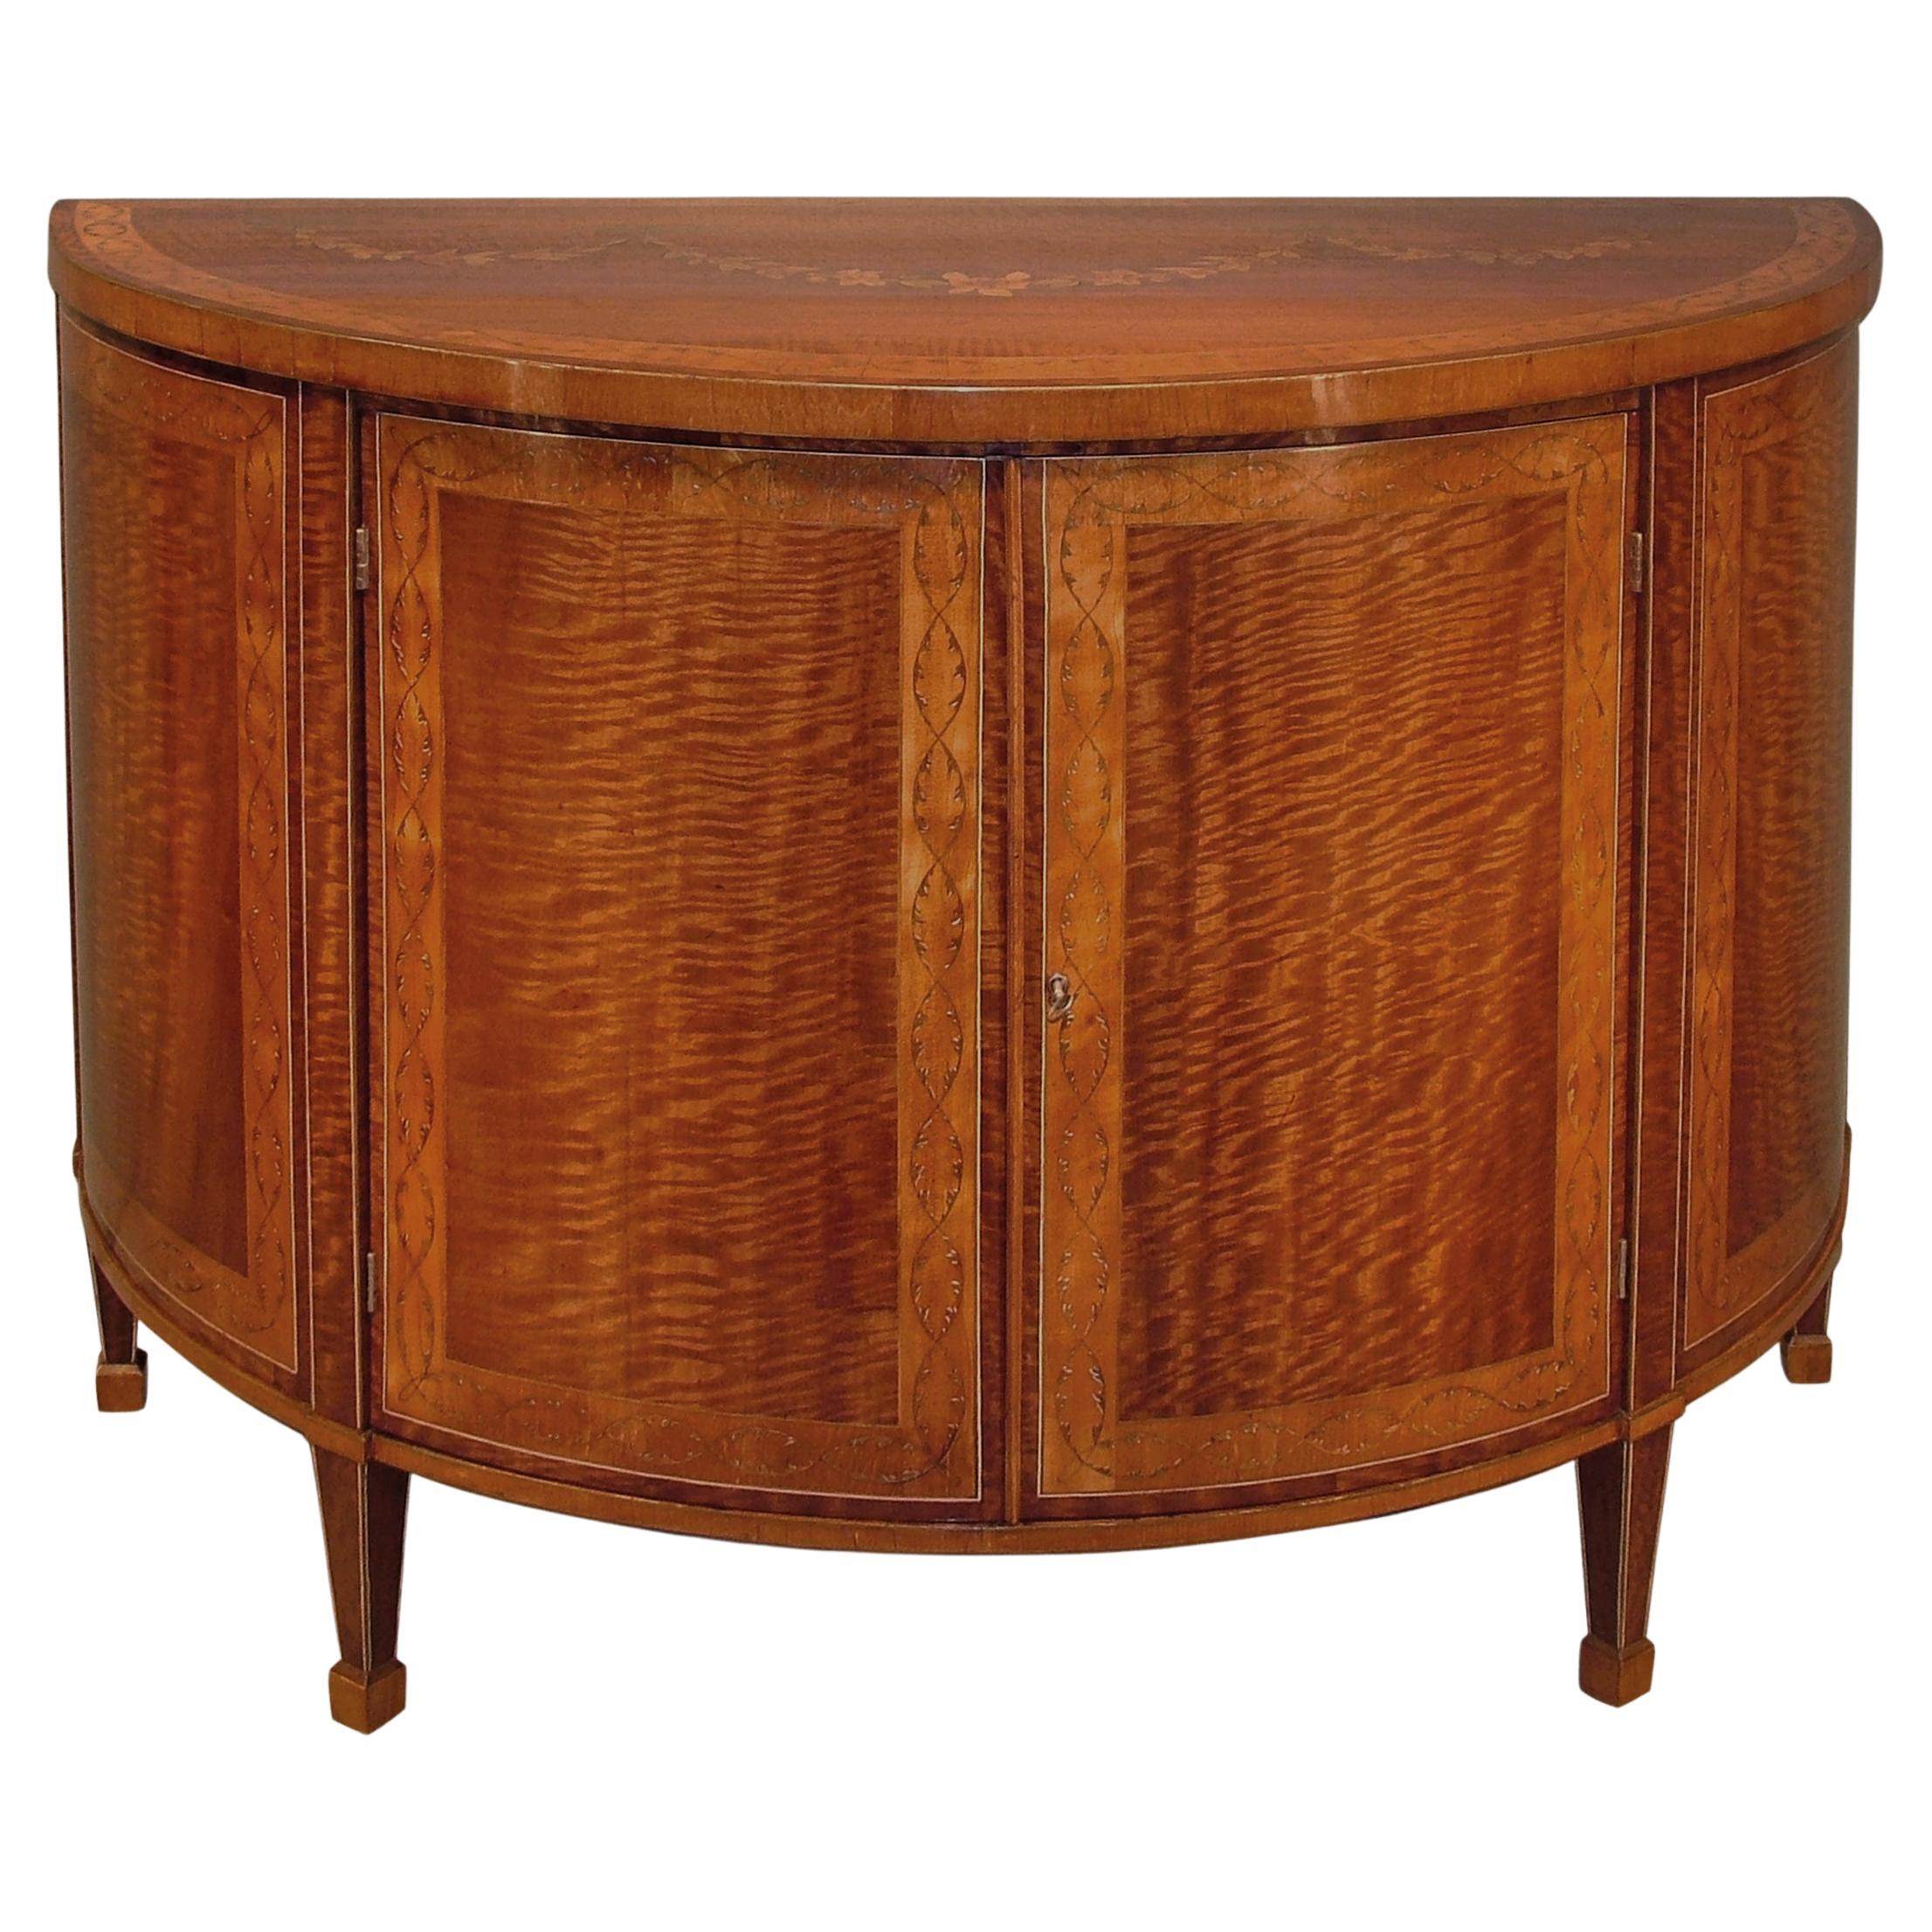 Late 18th Century Sheraton Period Mahogany and Satinwood Demilune Commode